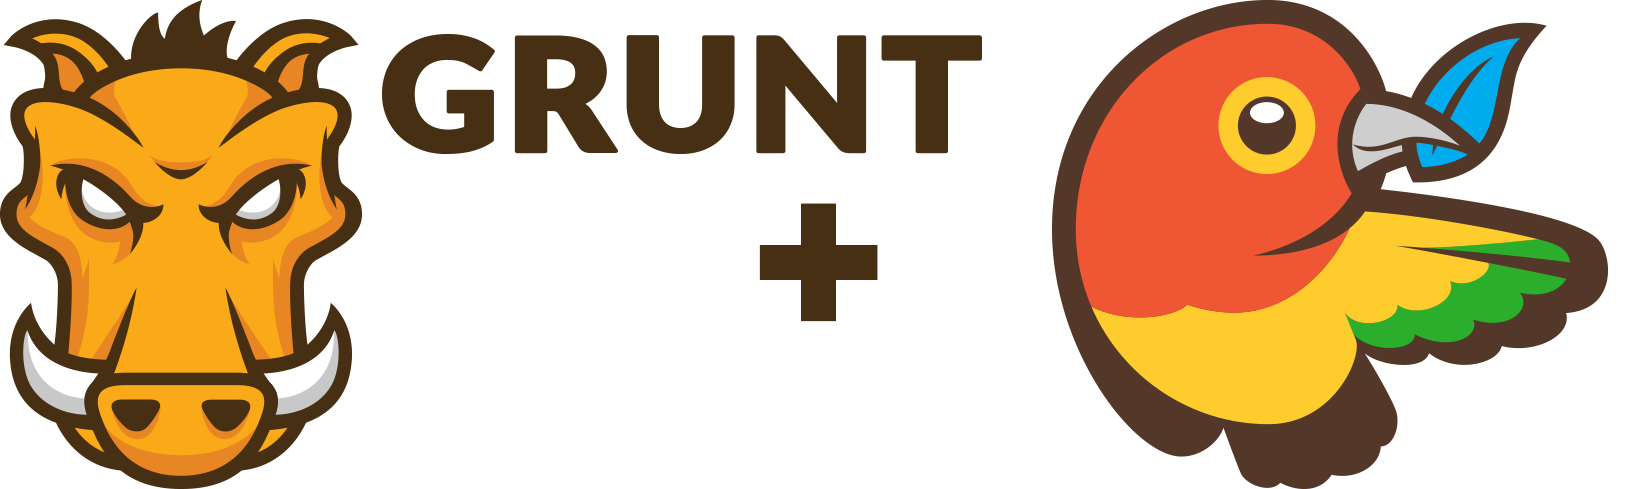 Grunt and Bower logos